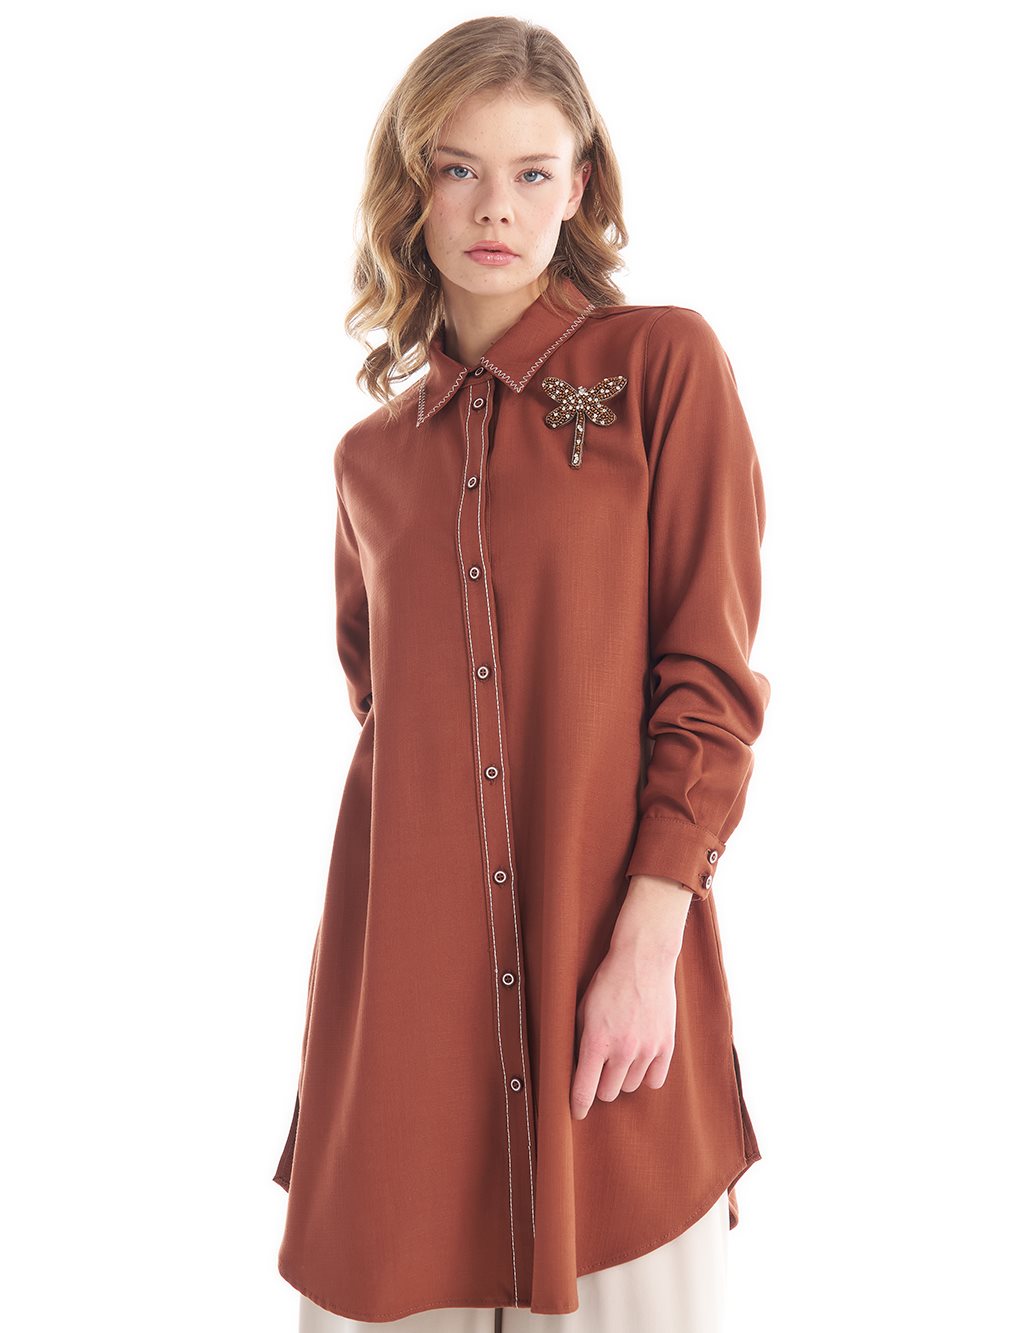 Shirt Collar Tunic with Knit Stitching in Brown